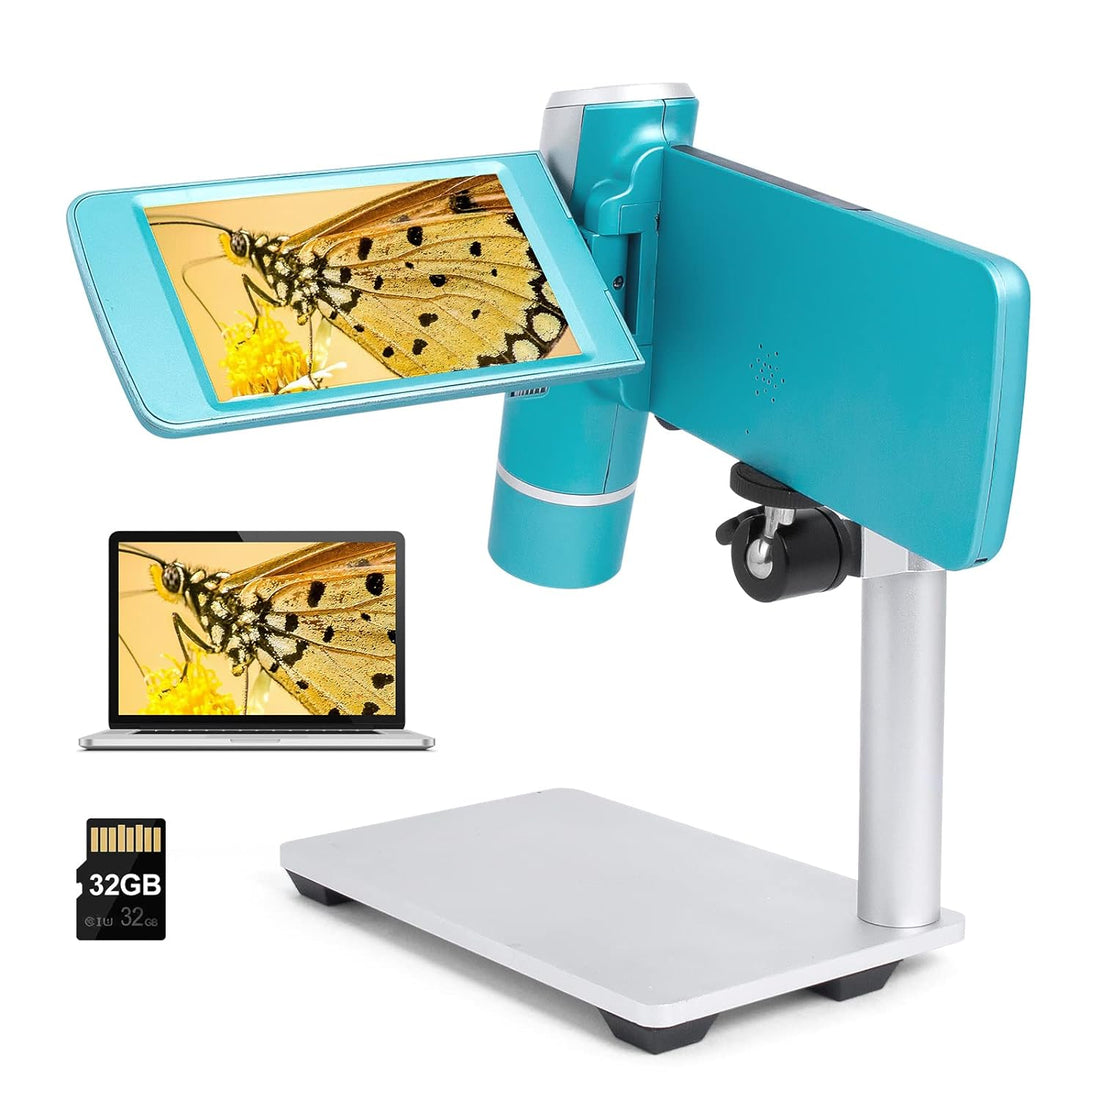 Andonstar AD203 Handheld Digital Microscope, 4 inch USB Coin Microscope with Metal Stand for Kids and Adults, Supports Windows Mac PC, Camera & Video Microscope, Blue Portable Microscope